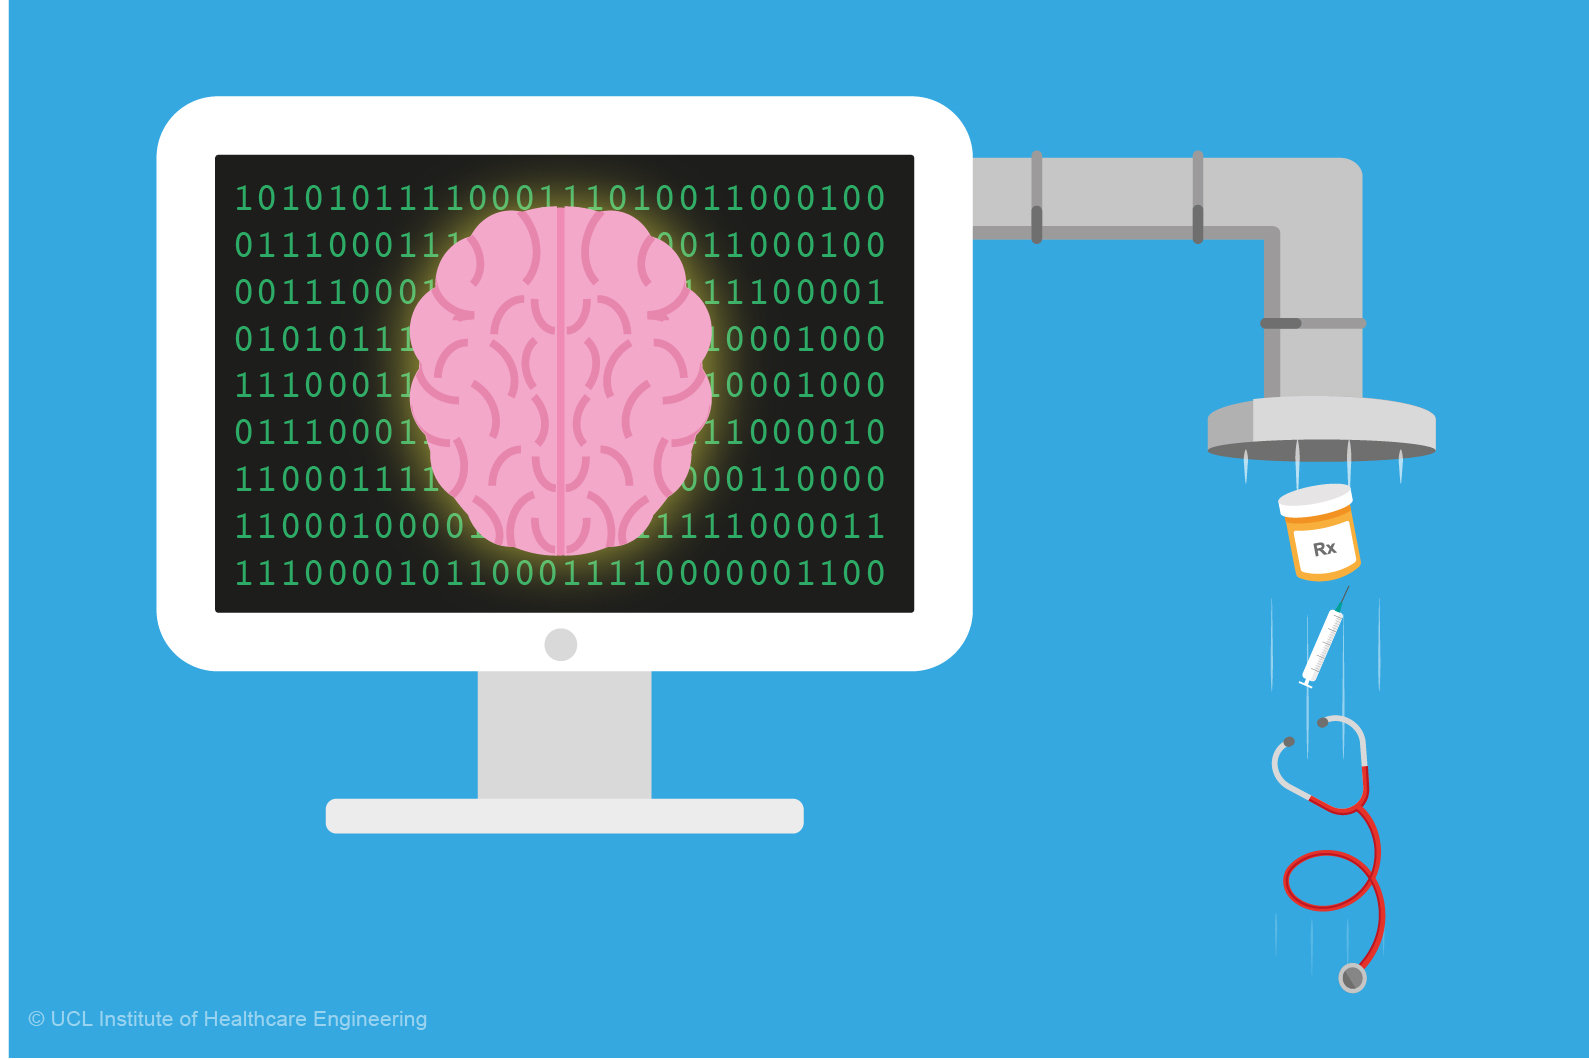 BLOG: Machine learning is transforming healthcare - but ...